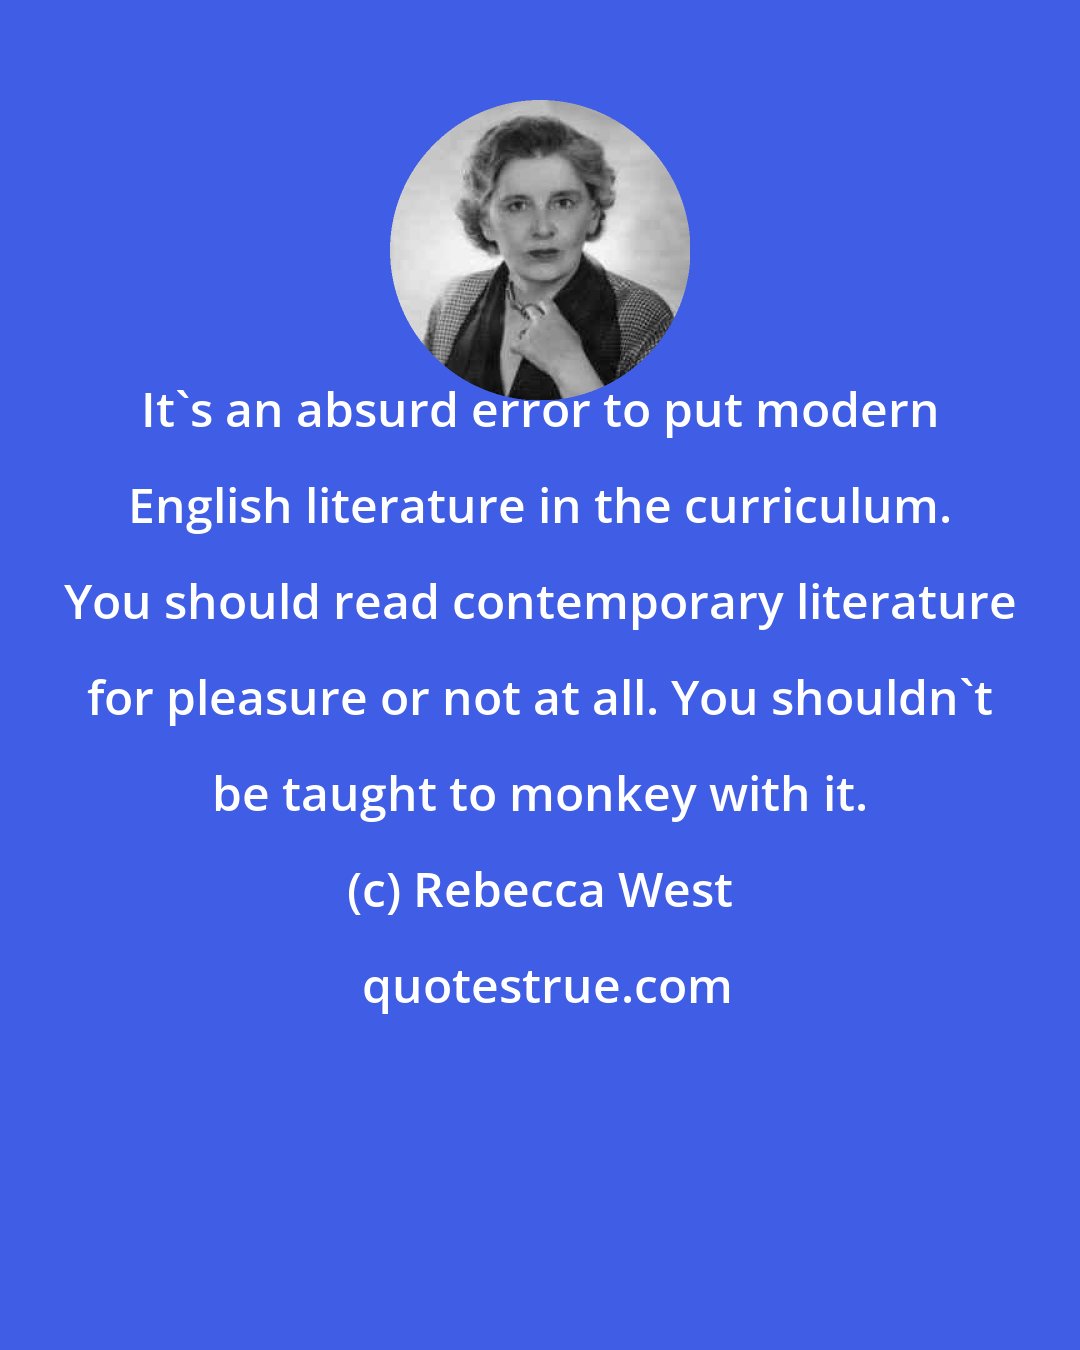 Rebecca West: It's an absurd error to put modern English literature in the curriculum. You should read contemporary literature for pleasure or not at all. You shouldn't be taught to monkey with it.